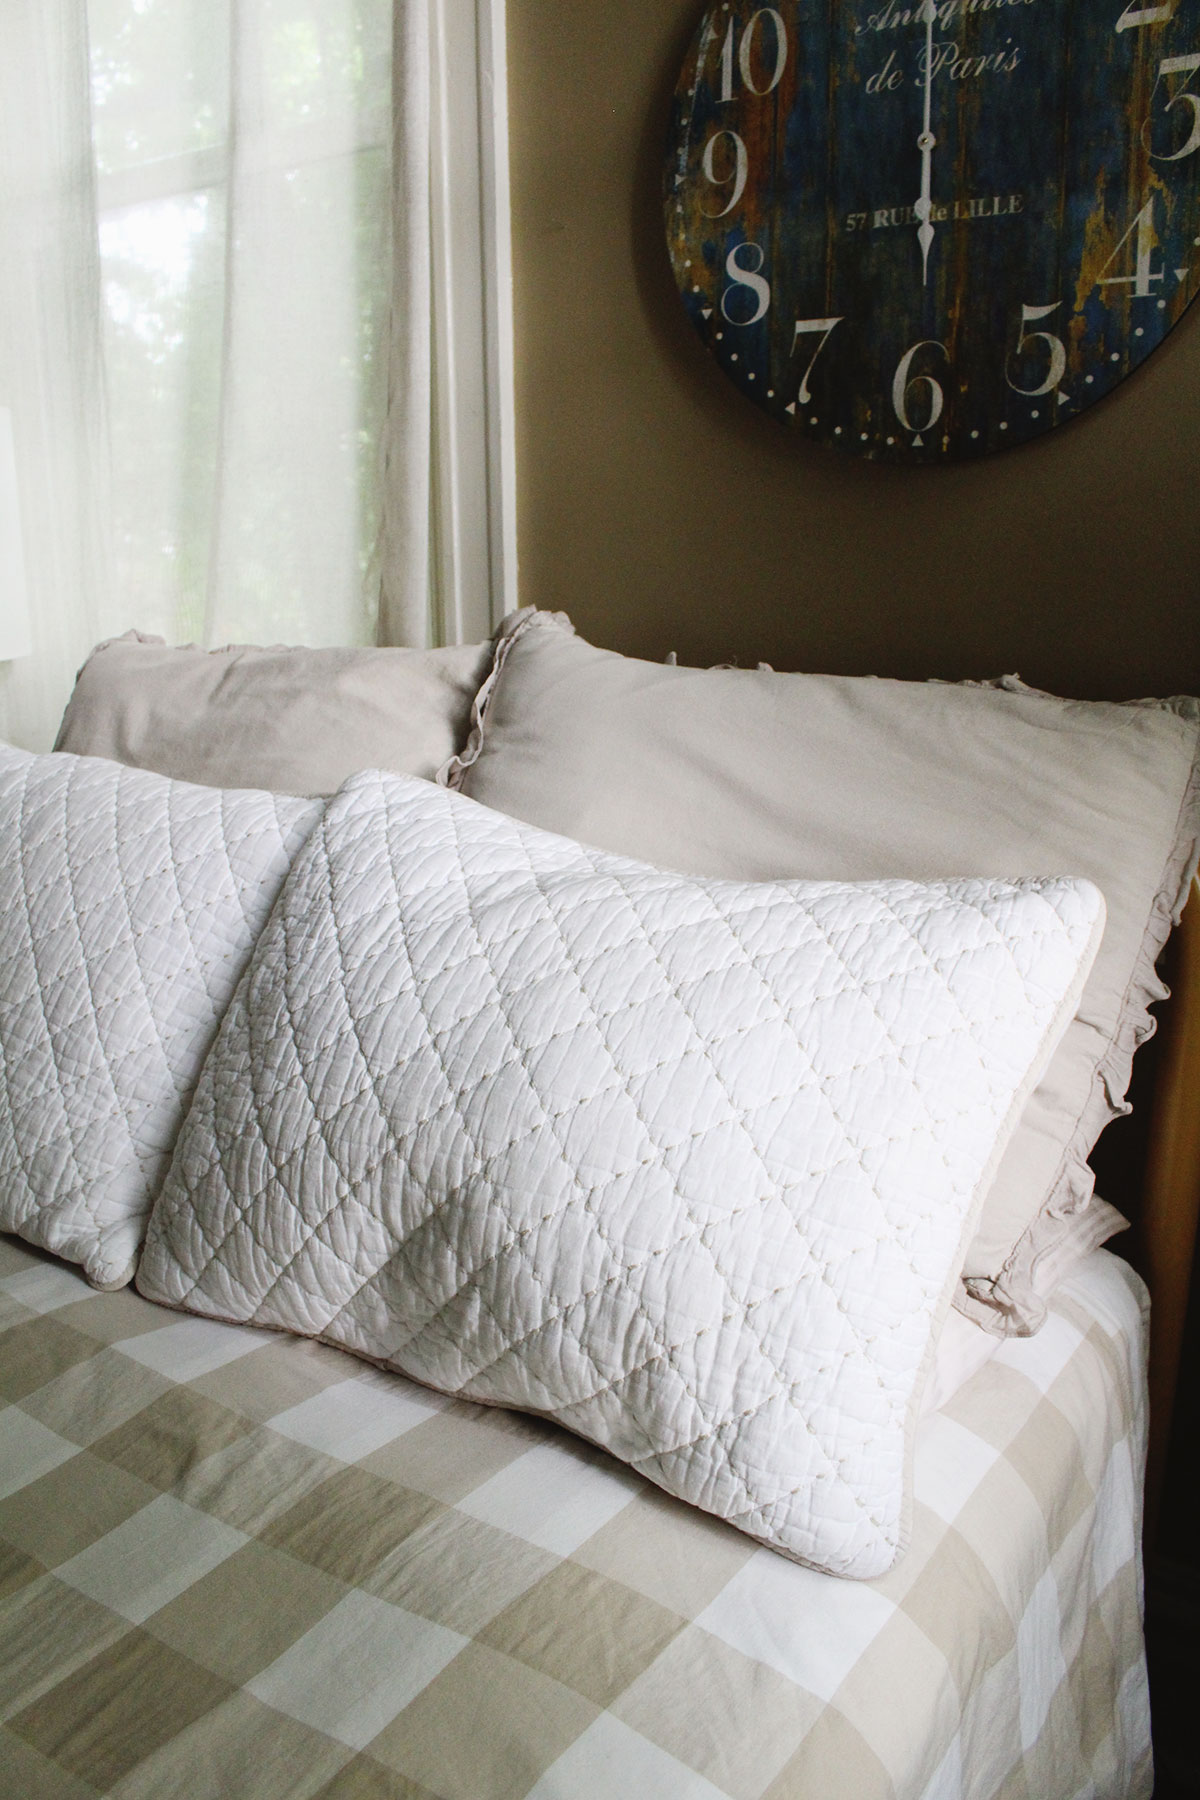 4 Tips for Decorating With Throw Pillows In Your Bedroom